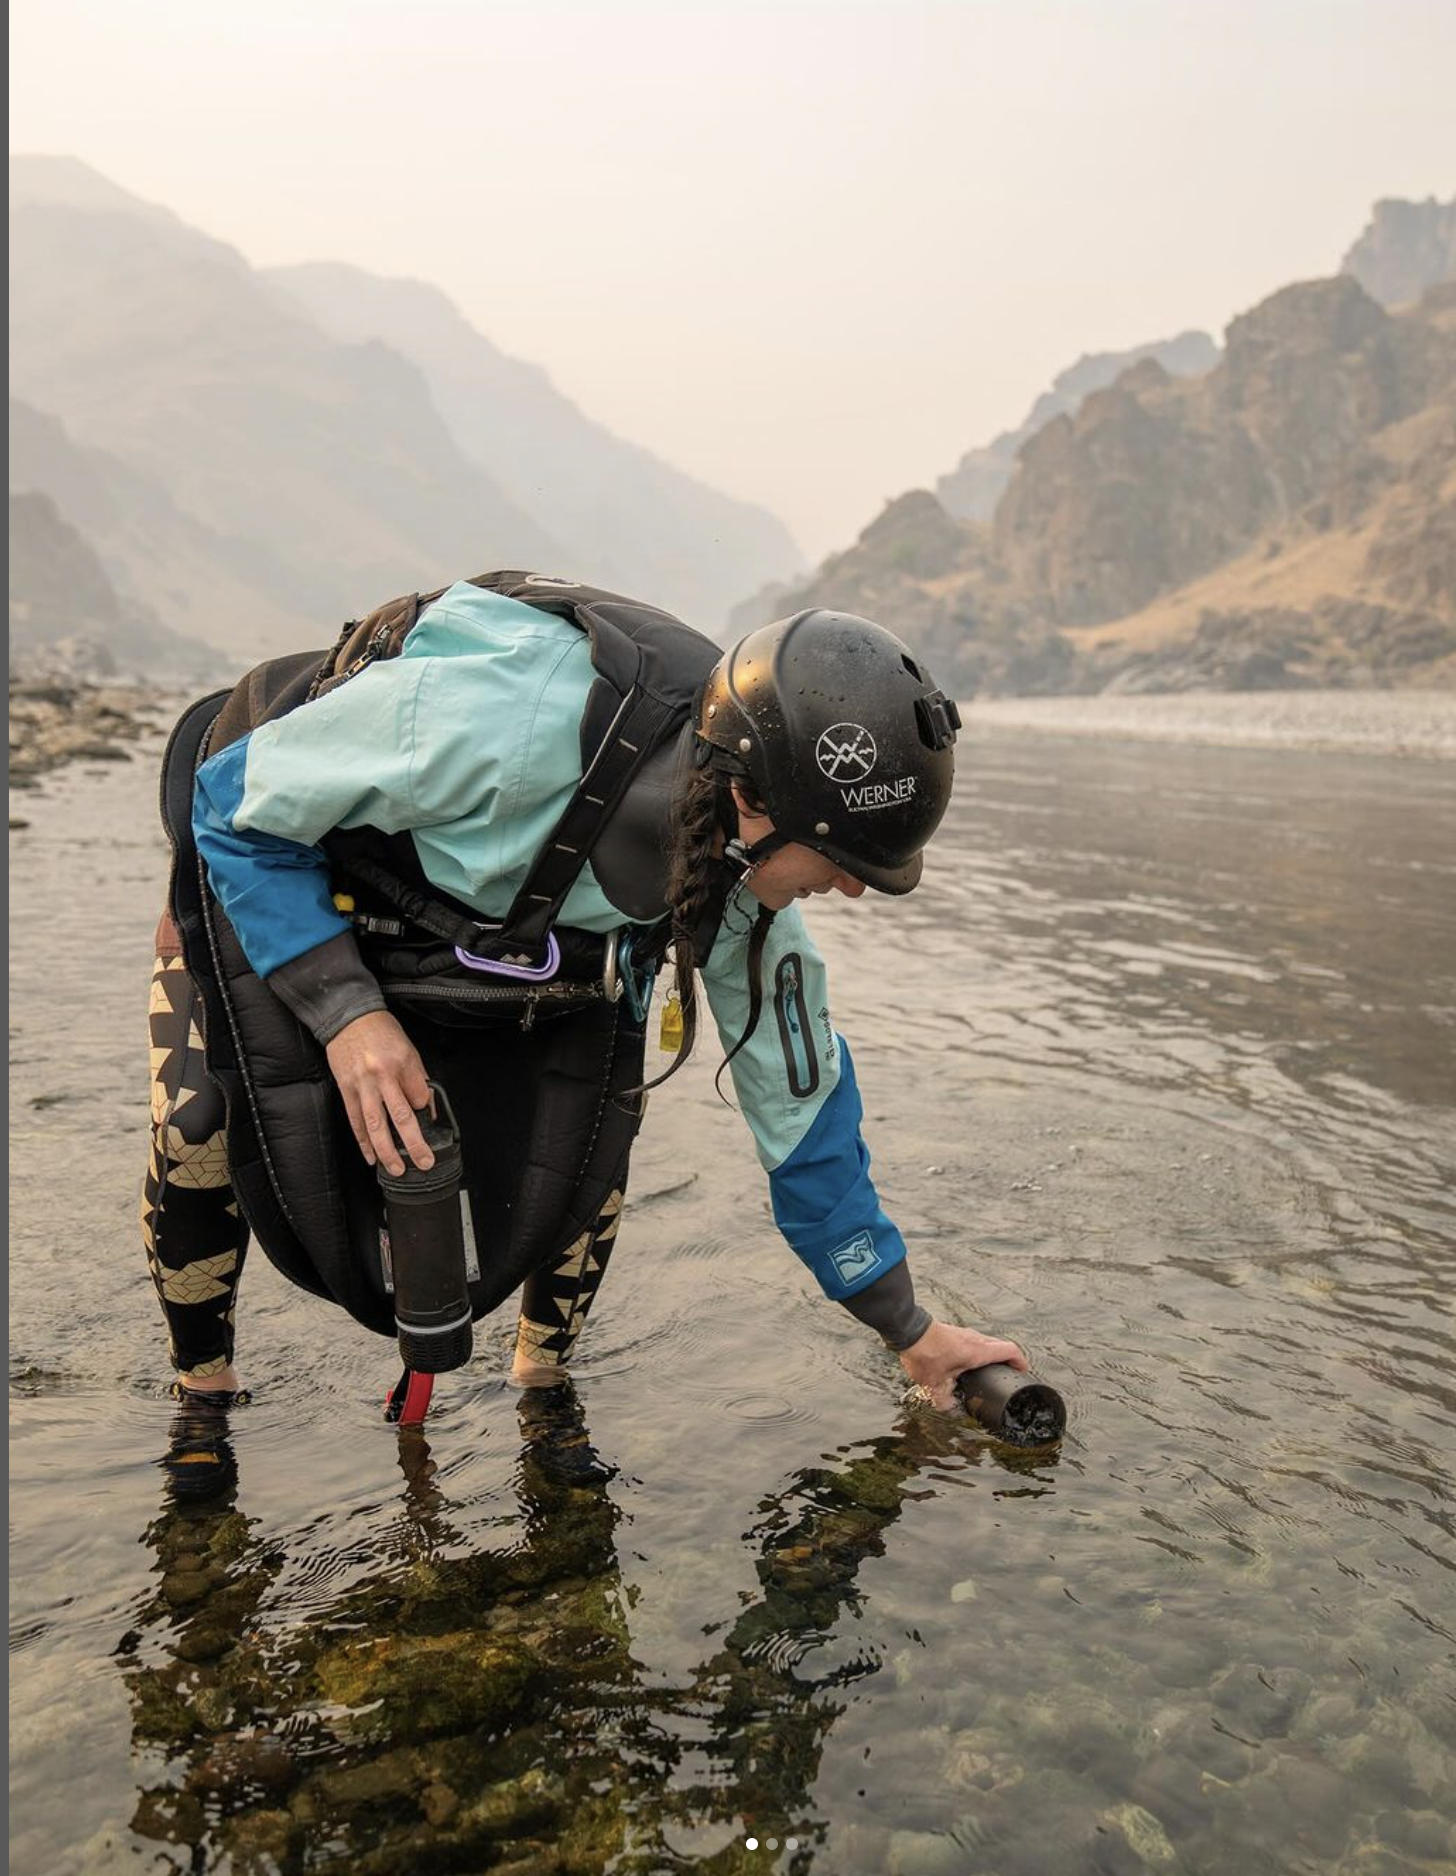 Researcher in protective gear collecting water samples from a river amidst hazy conditions, with an equipment bag.